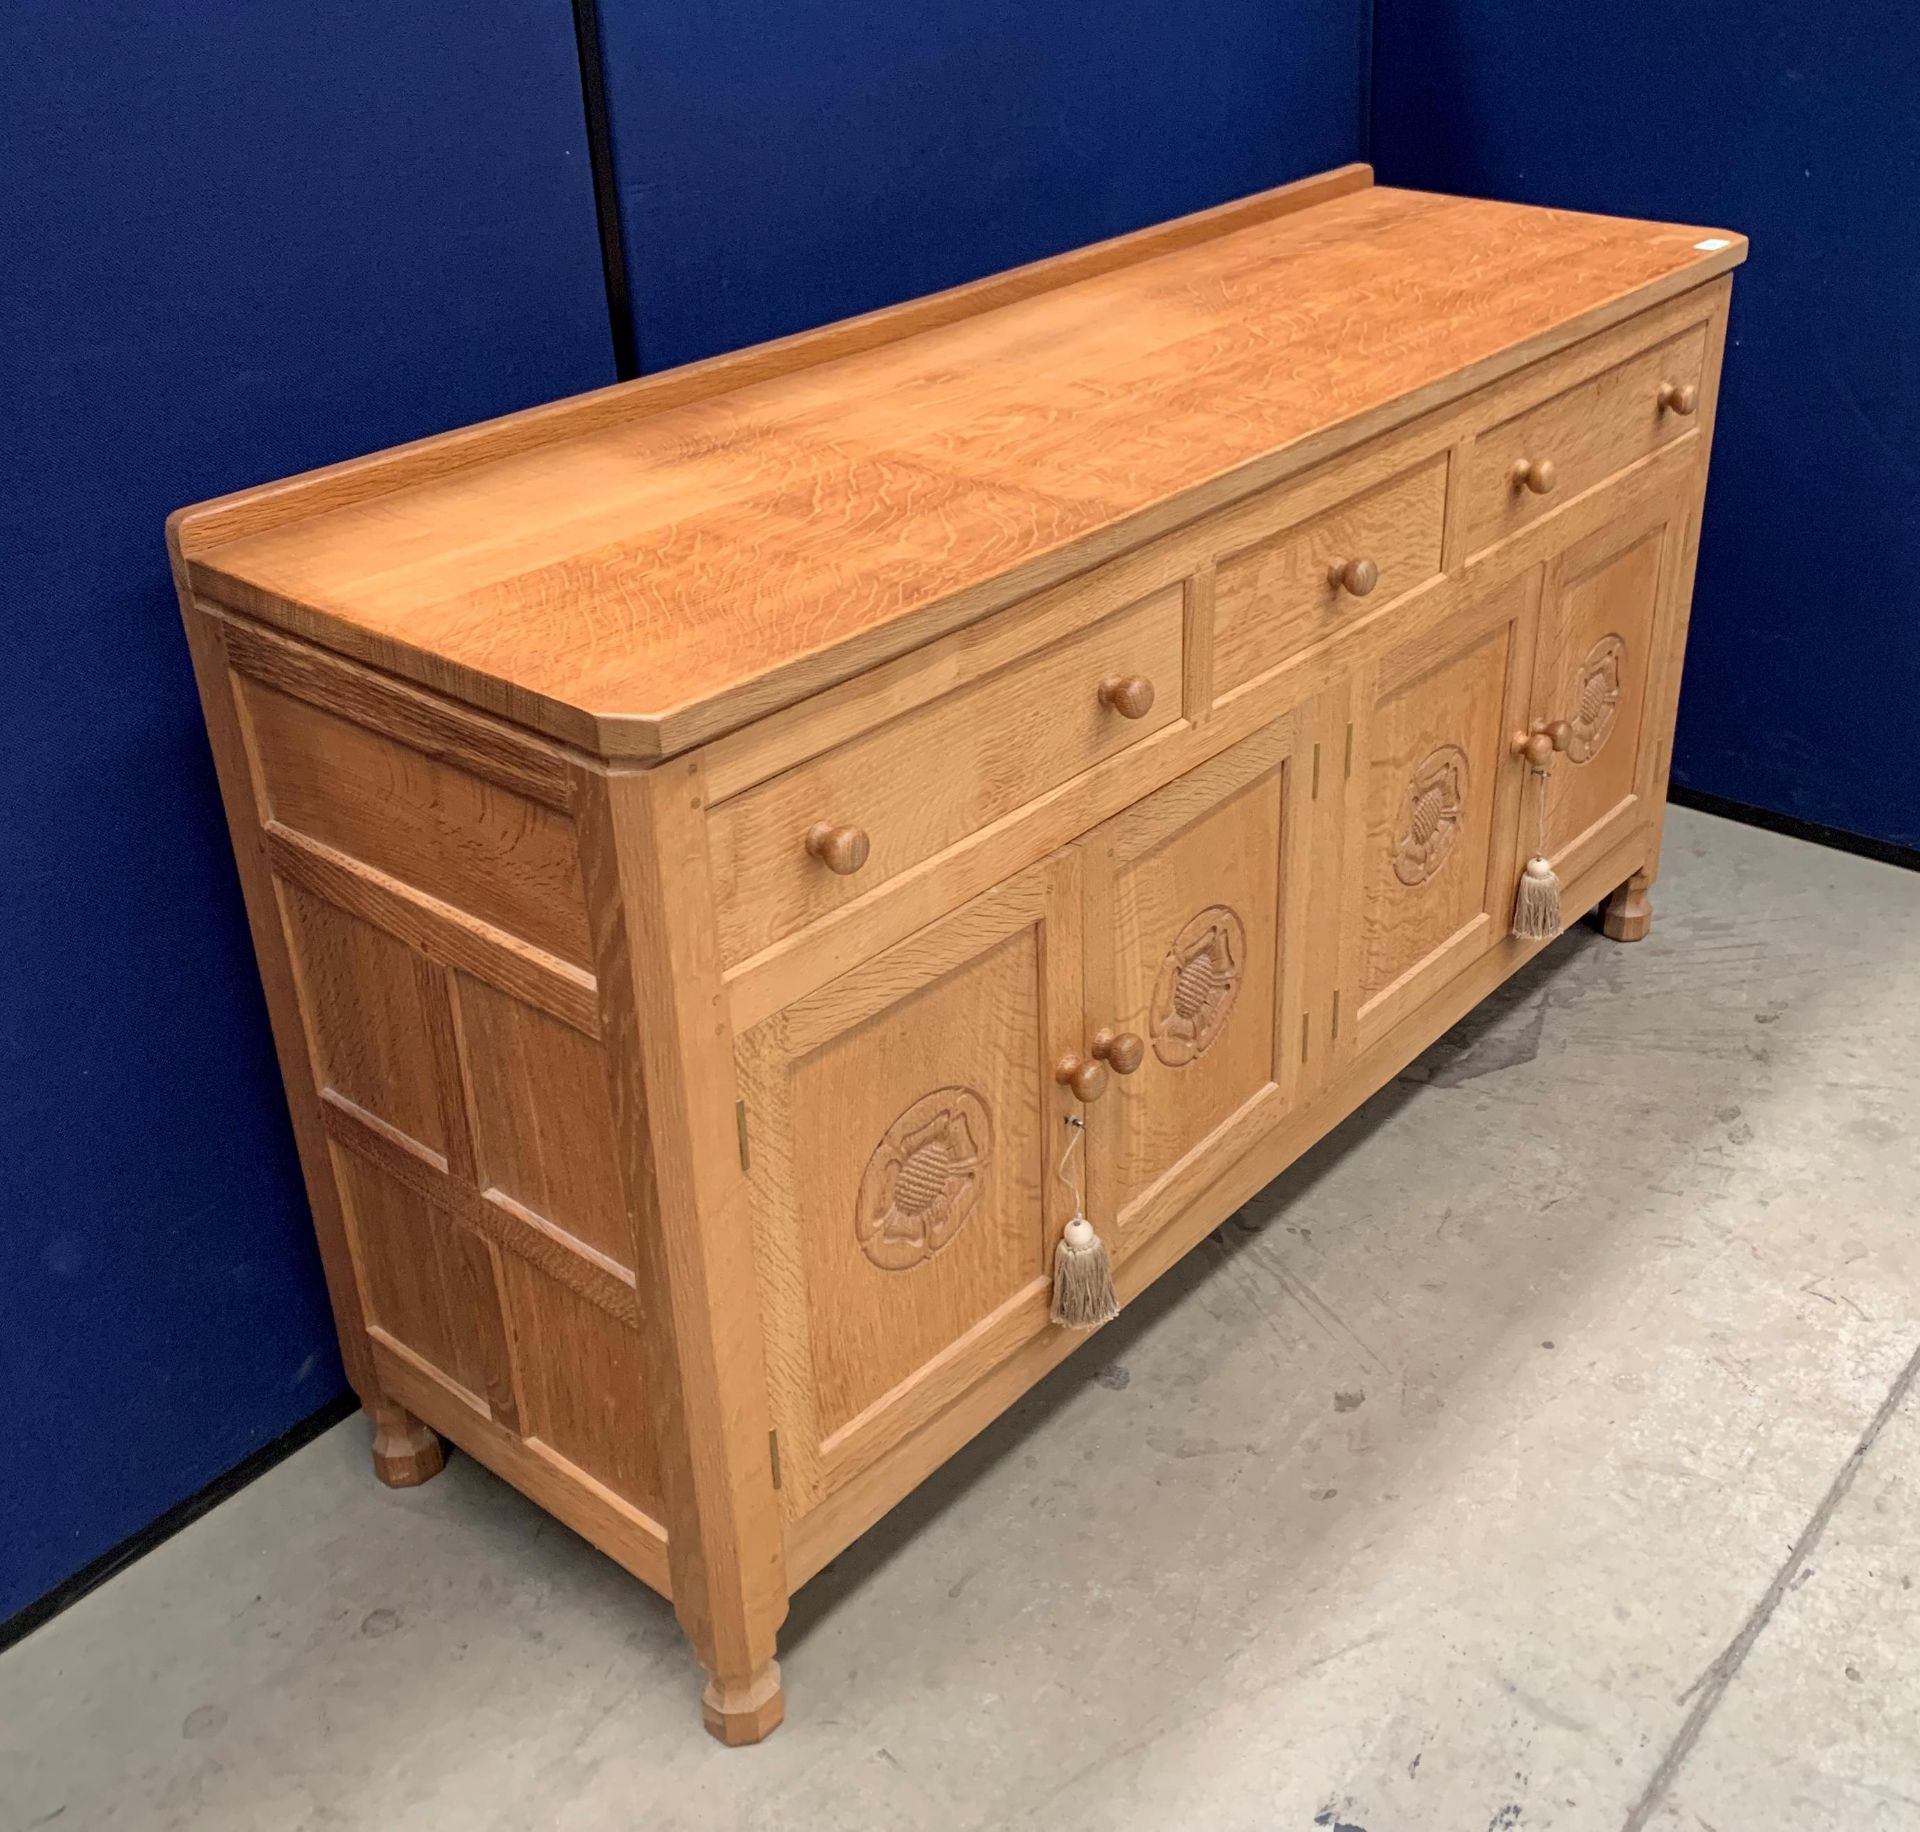 AN ALBERT JEFFRAY, SESSAY, EAGLEMAN OAK SIDEBOARD with adzed top - three drawer, - Image 2 of 7